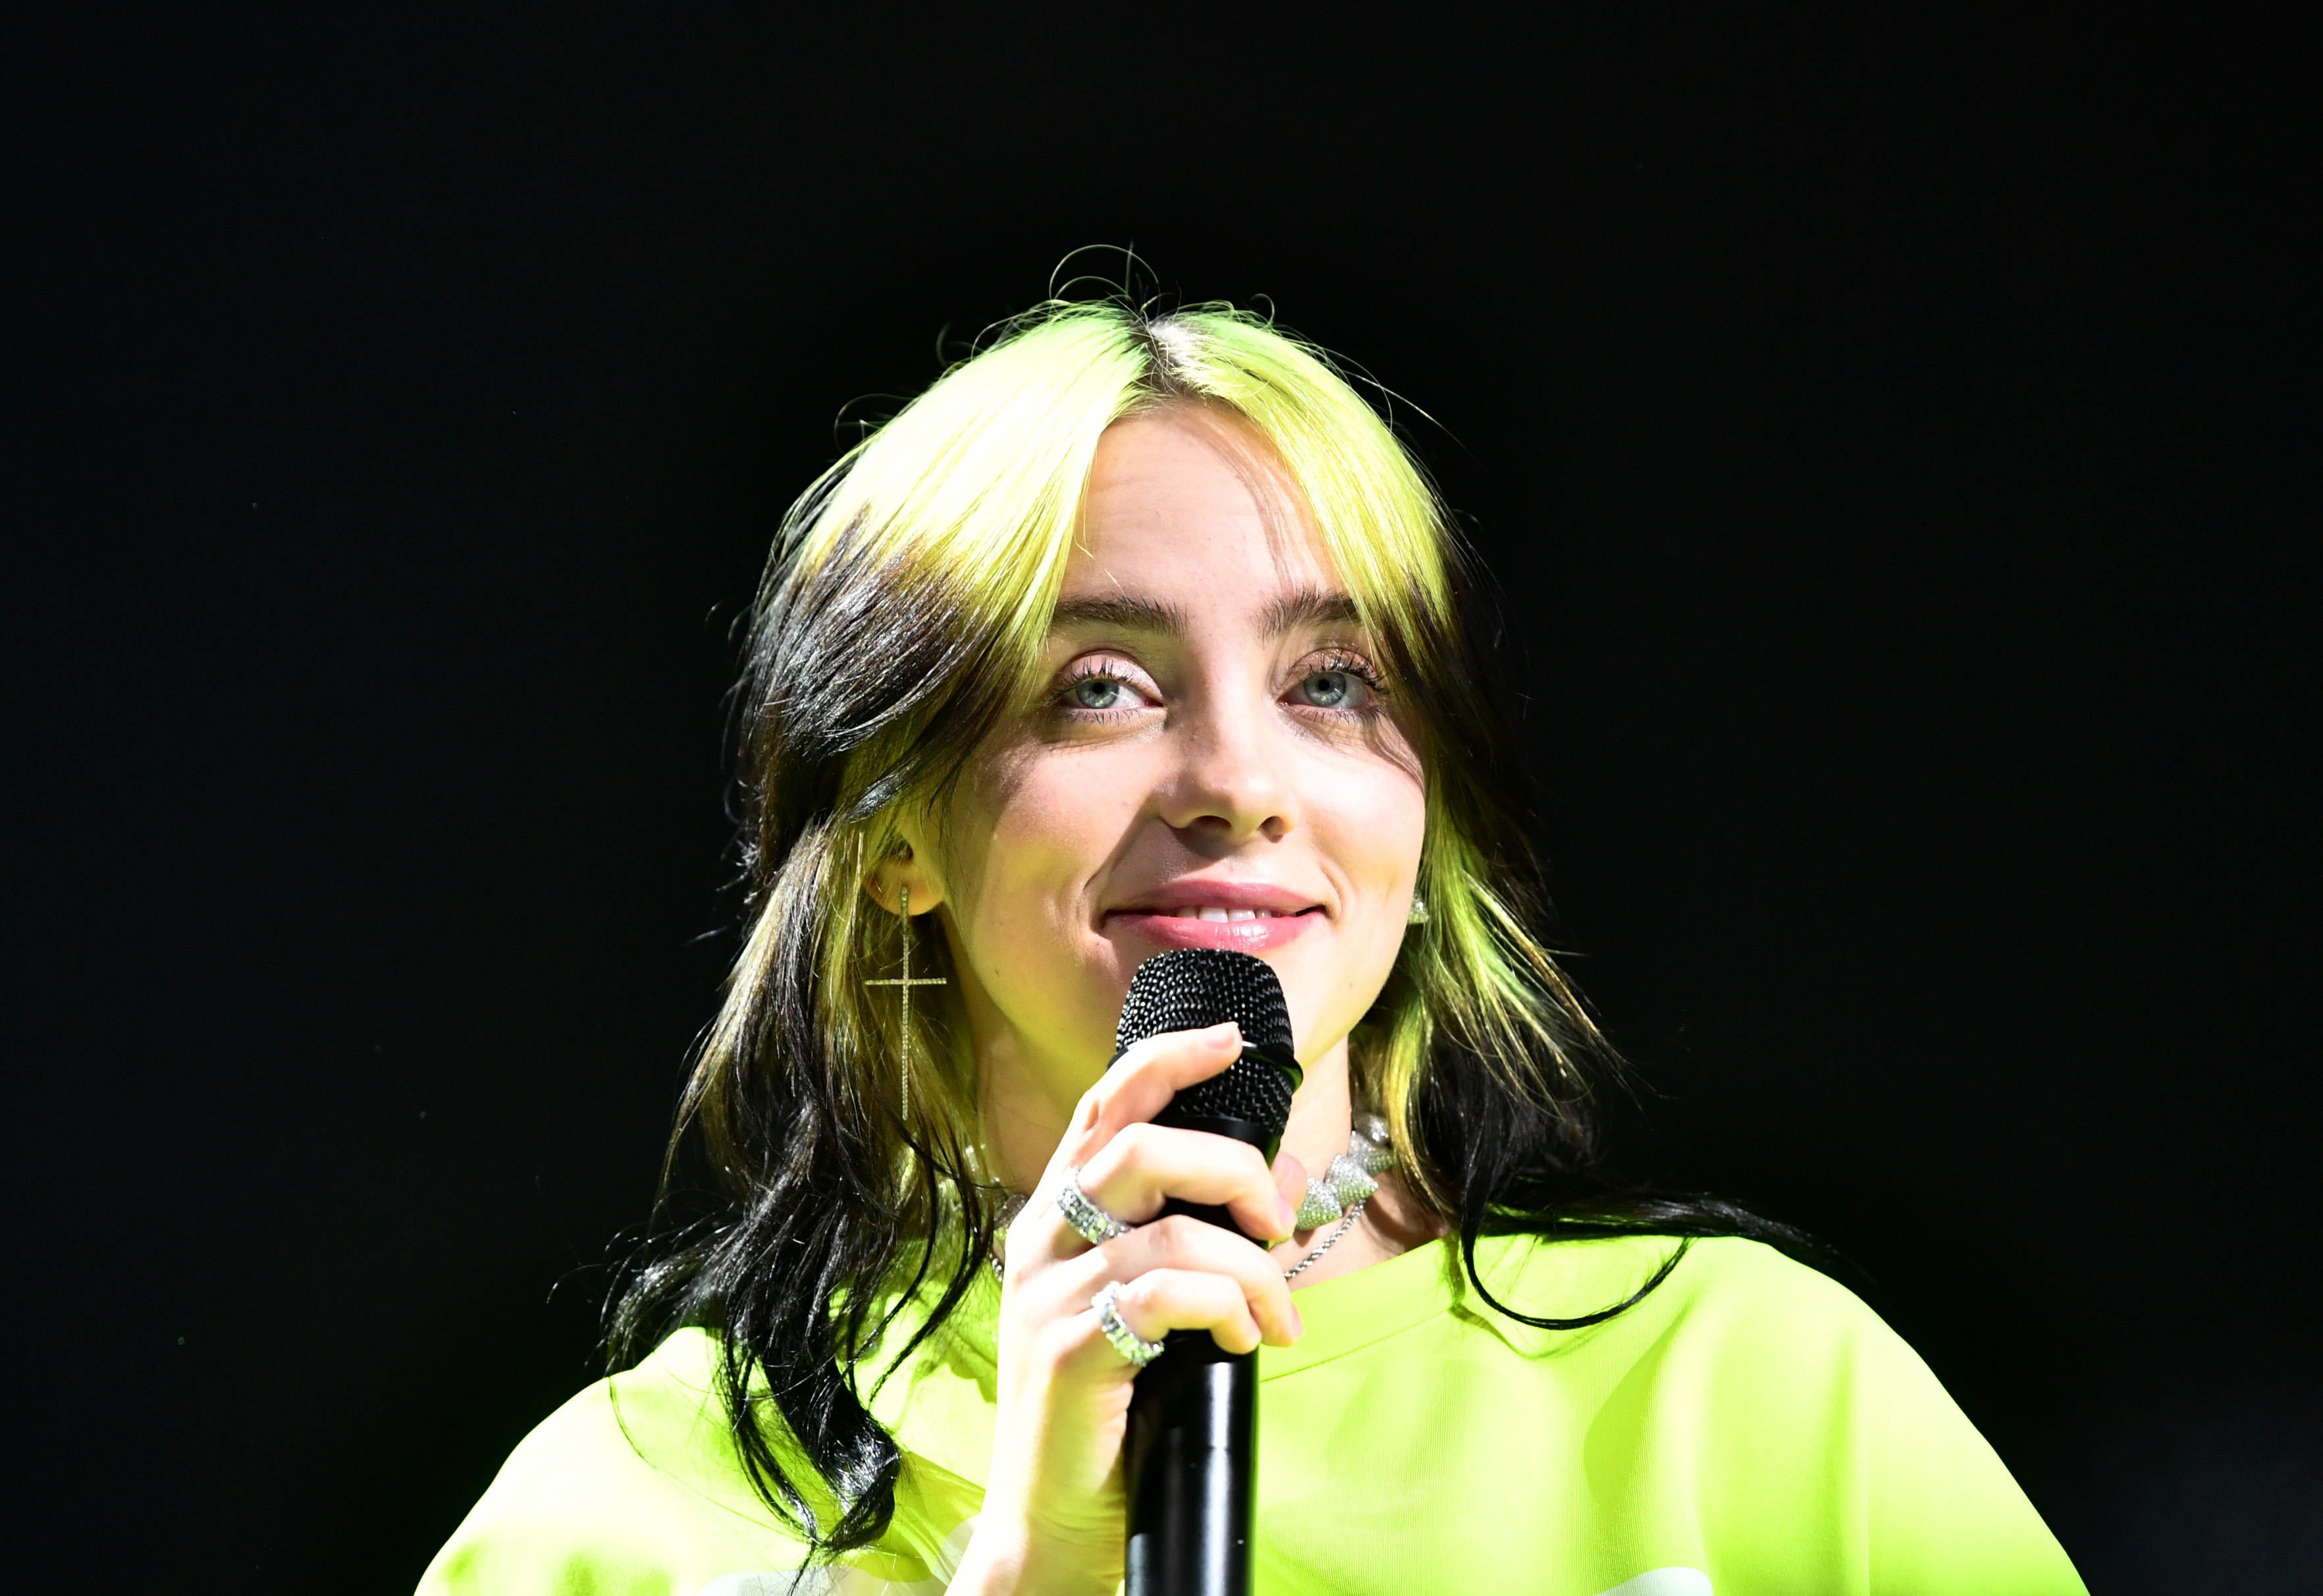 Billie Eilish performs onstage at Spotify Hosts "Best New Artist" Party at The Lot Studios on January 23, 2020 in Los Angeles, California.